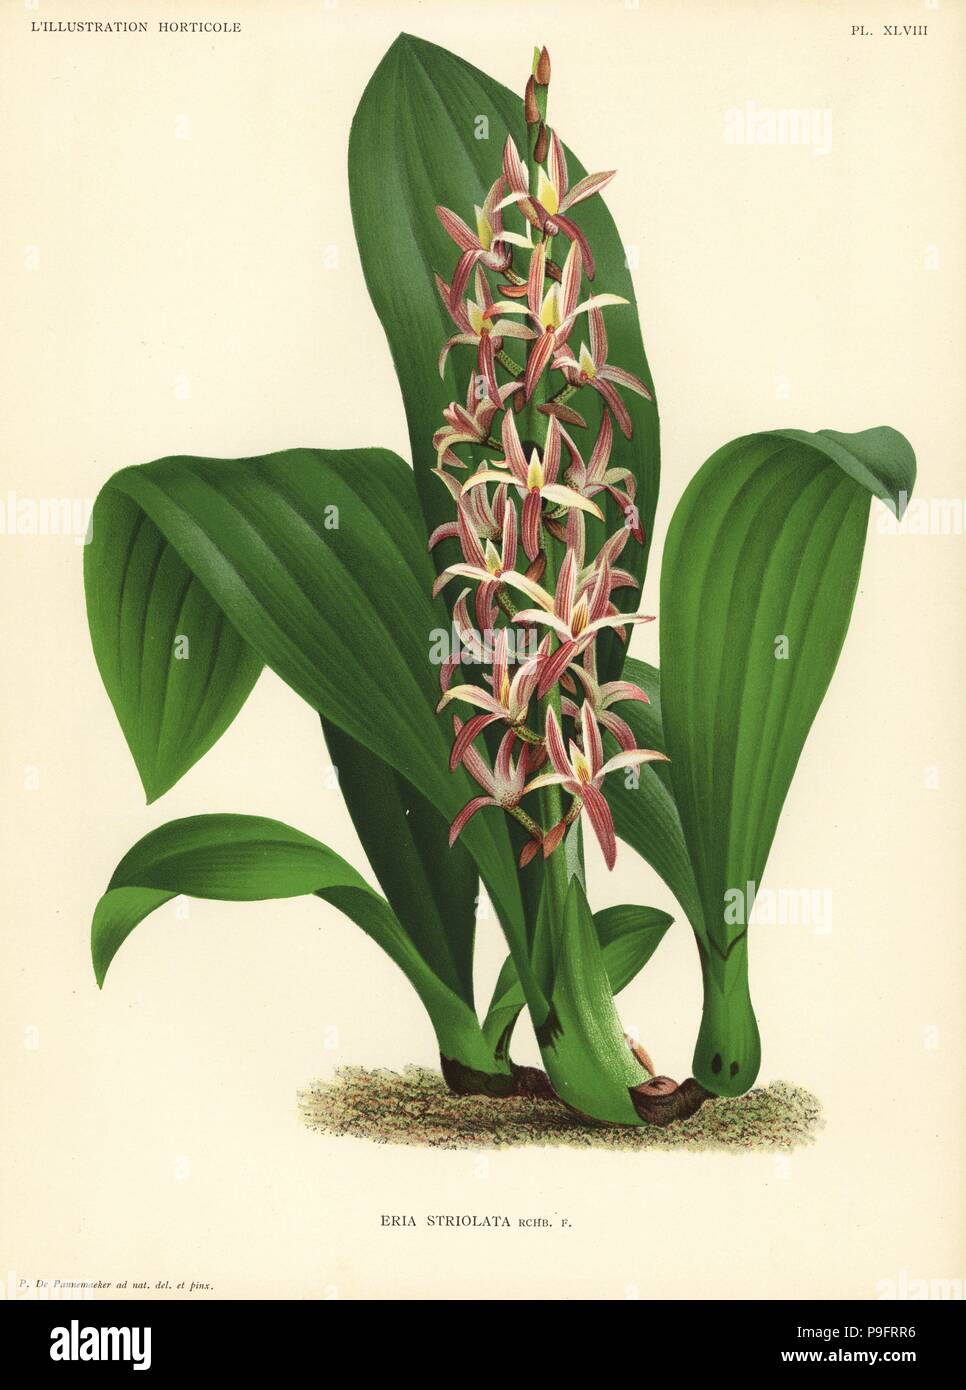 Eria javanica orchid (Eria striolata). Drawn and chromolithographed by Pieter de Pannemaeker from Jean Linden's l'Illustration Horticole, Brussels, 1888. Stock Photo